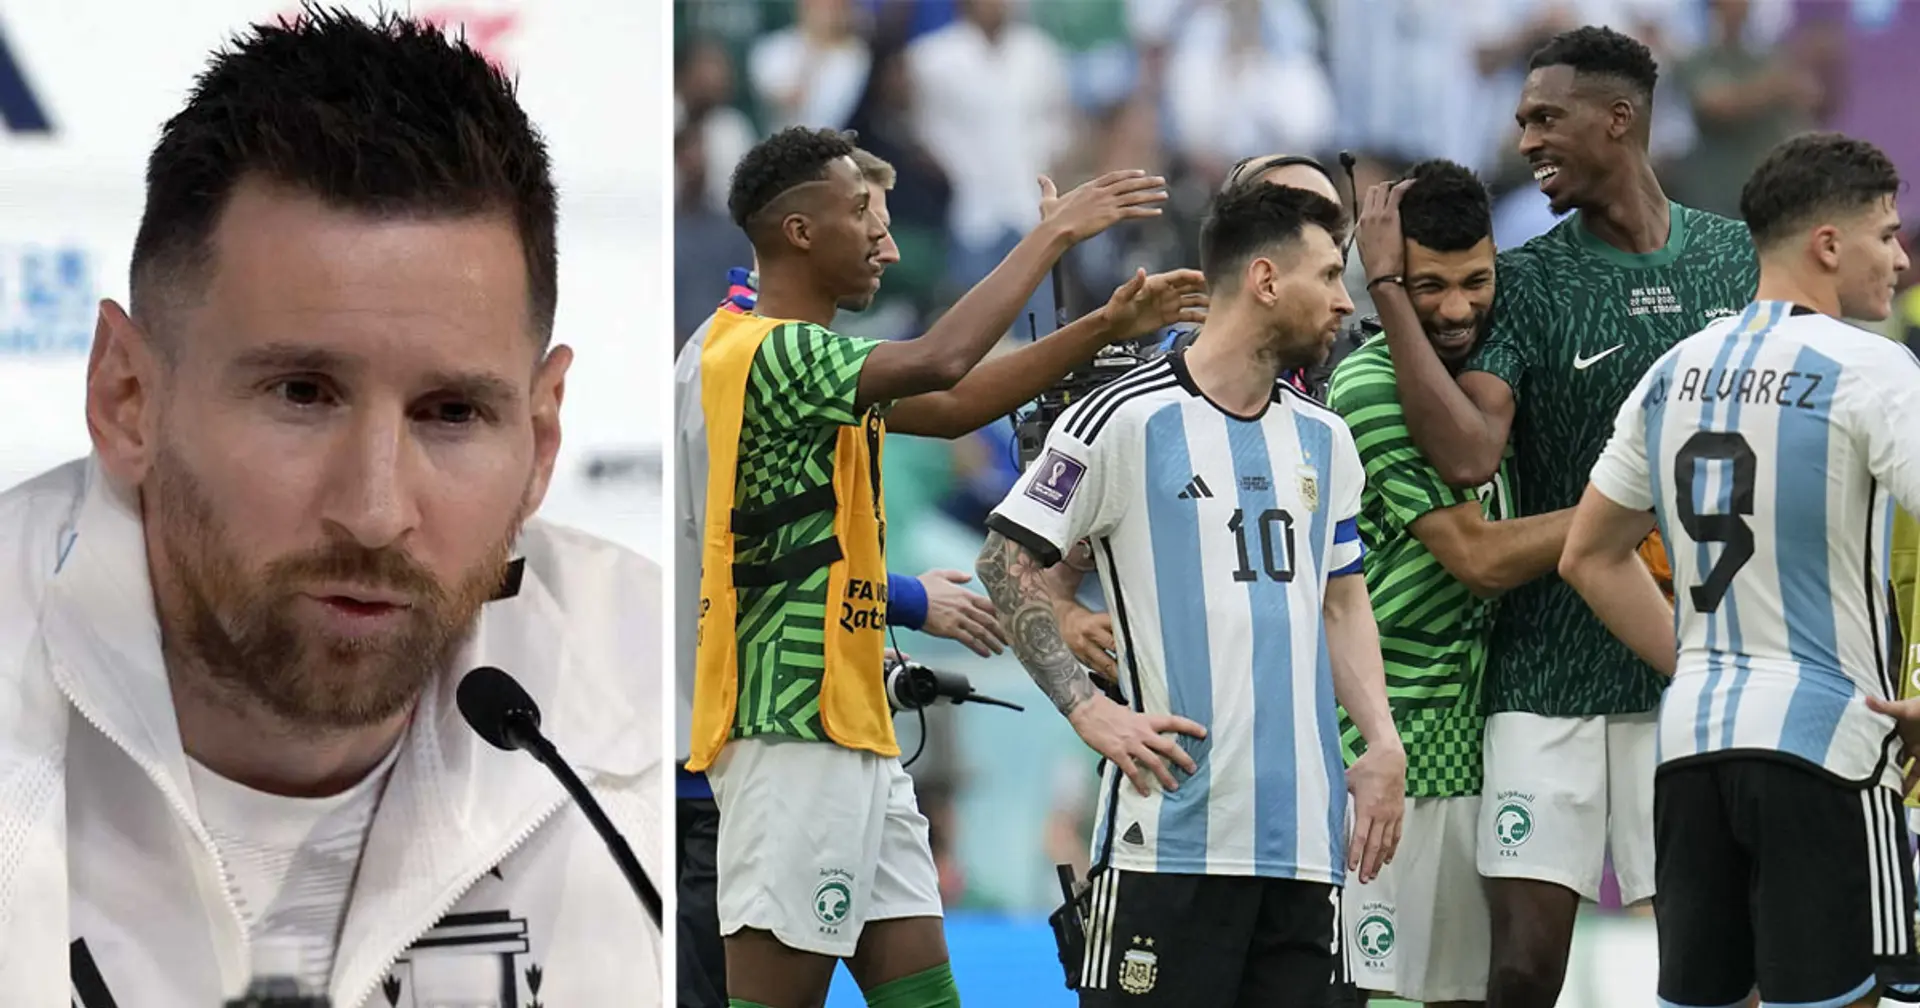 'The team was dead': Messi comments on embarrassing defeat to Saudi Arabia